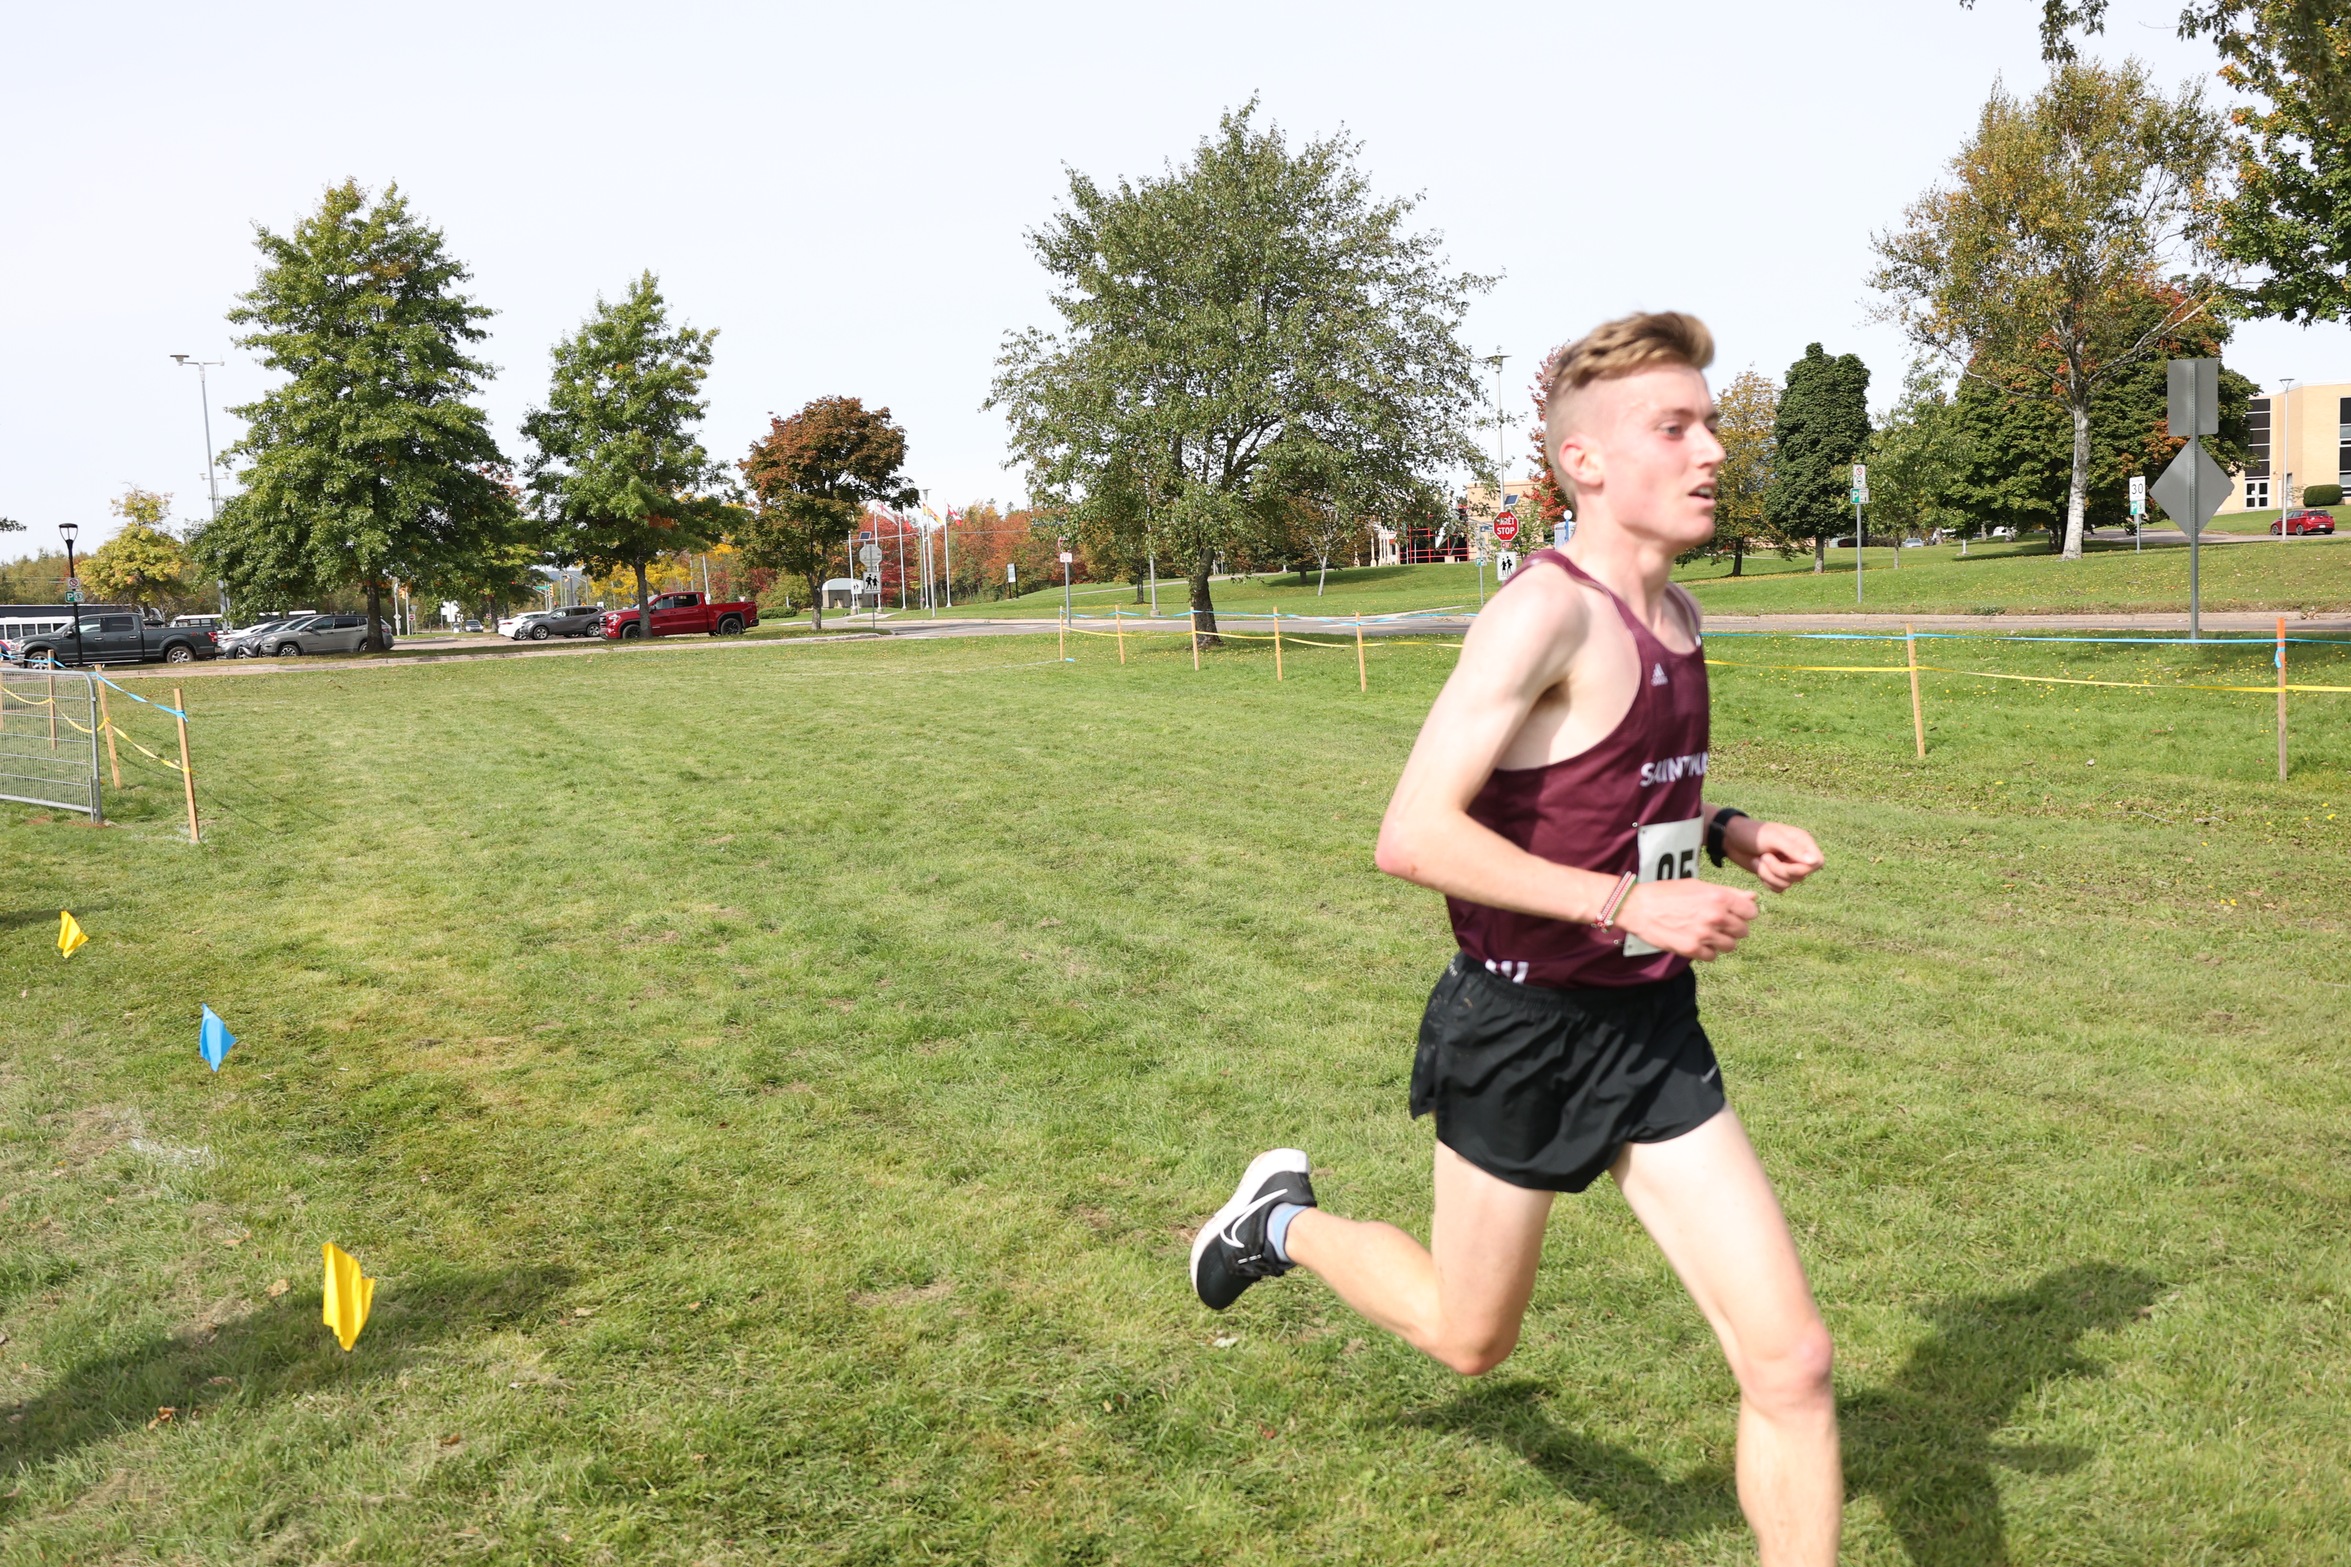 Fifth year Andrew Peverill ran to the top of the podium at Saturday's Universit� de Moncton Invitational, winning the men's 8km race with a time of 26:17. (Photo courtesy: Universit� de Moncton Athletics)